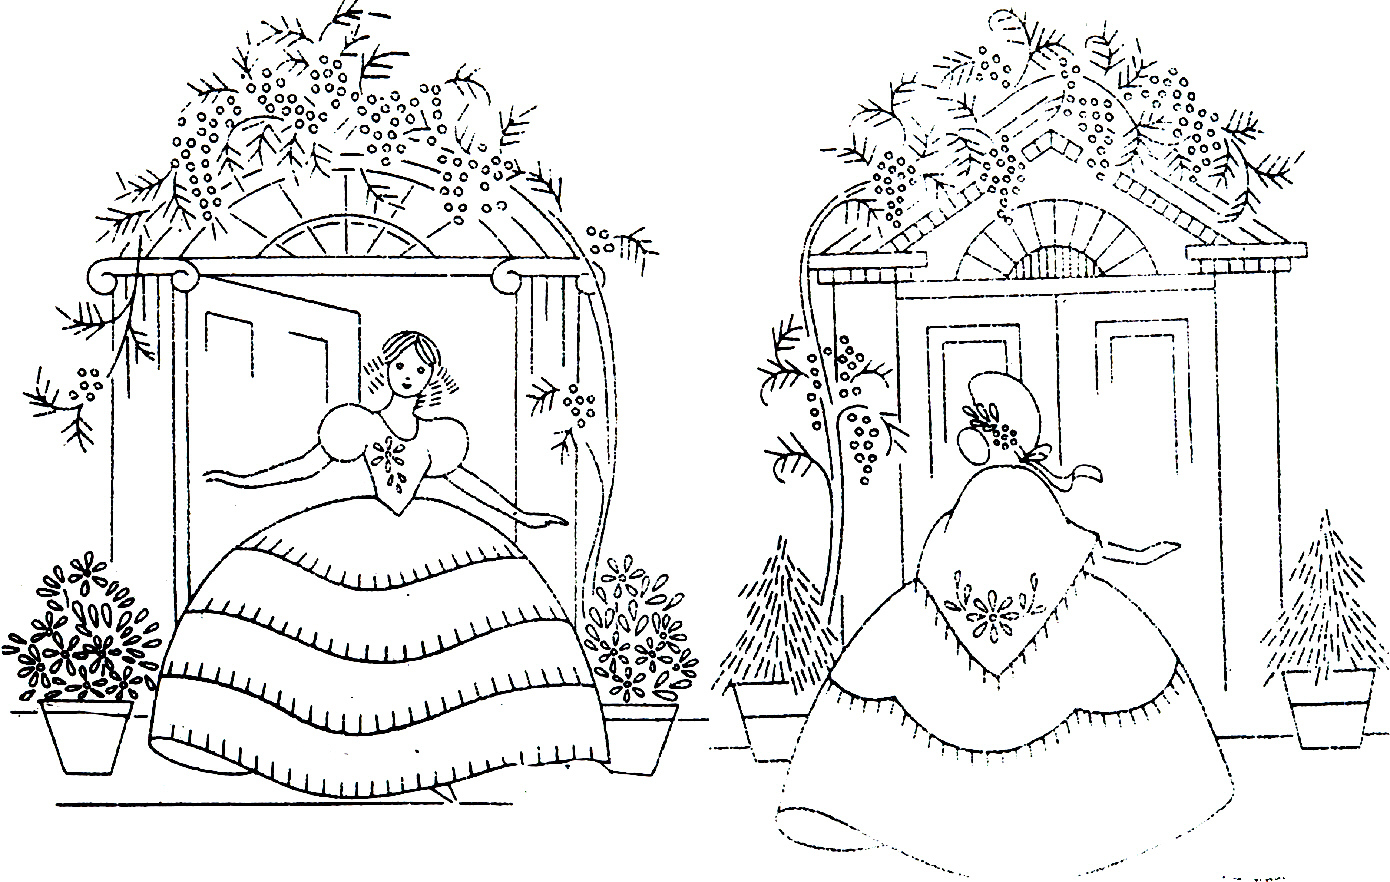 2 Southern Belle / Crinoline Lady embroidery pattern BB  - $5.00